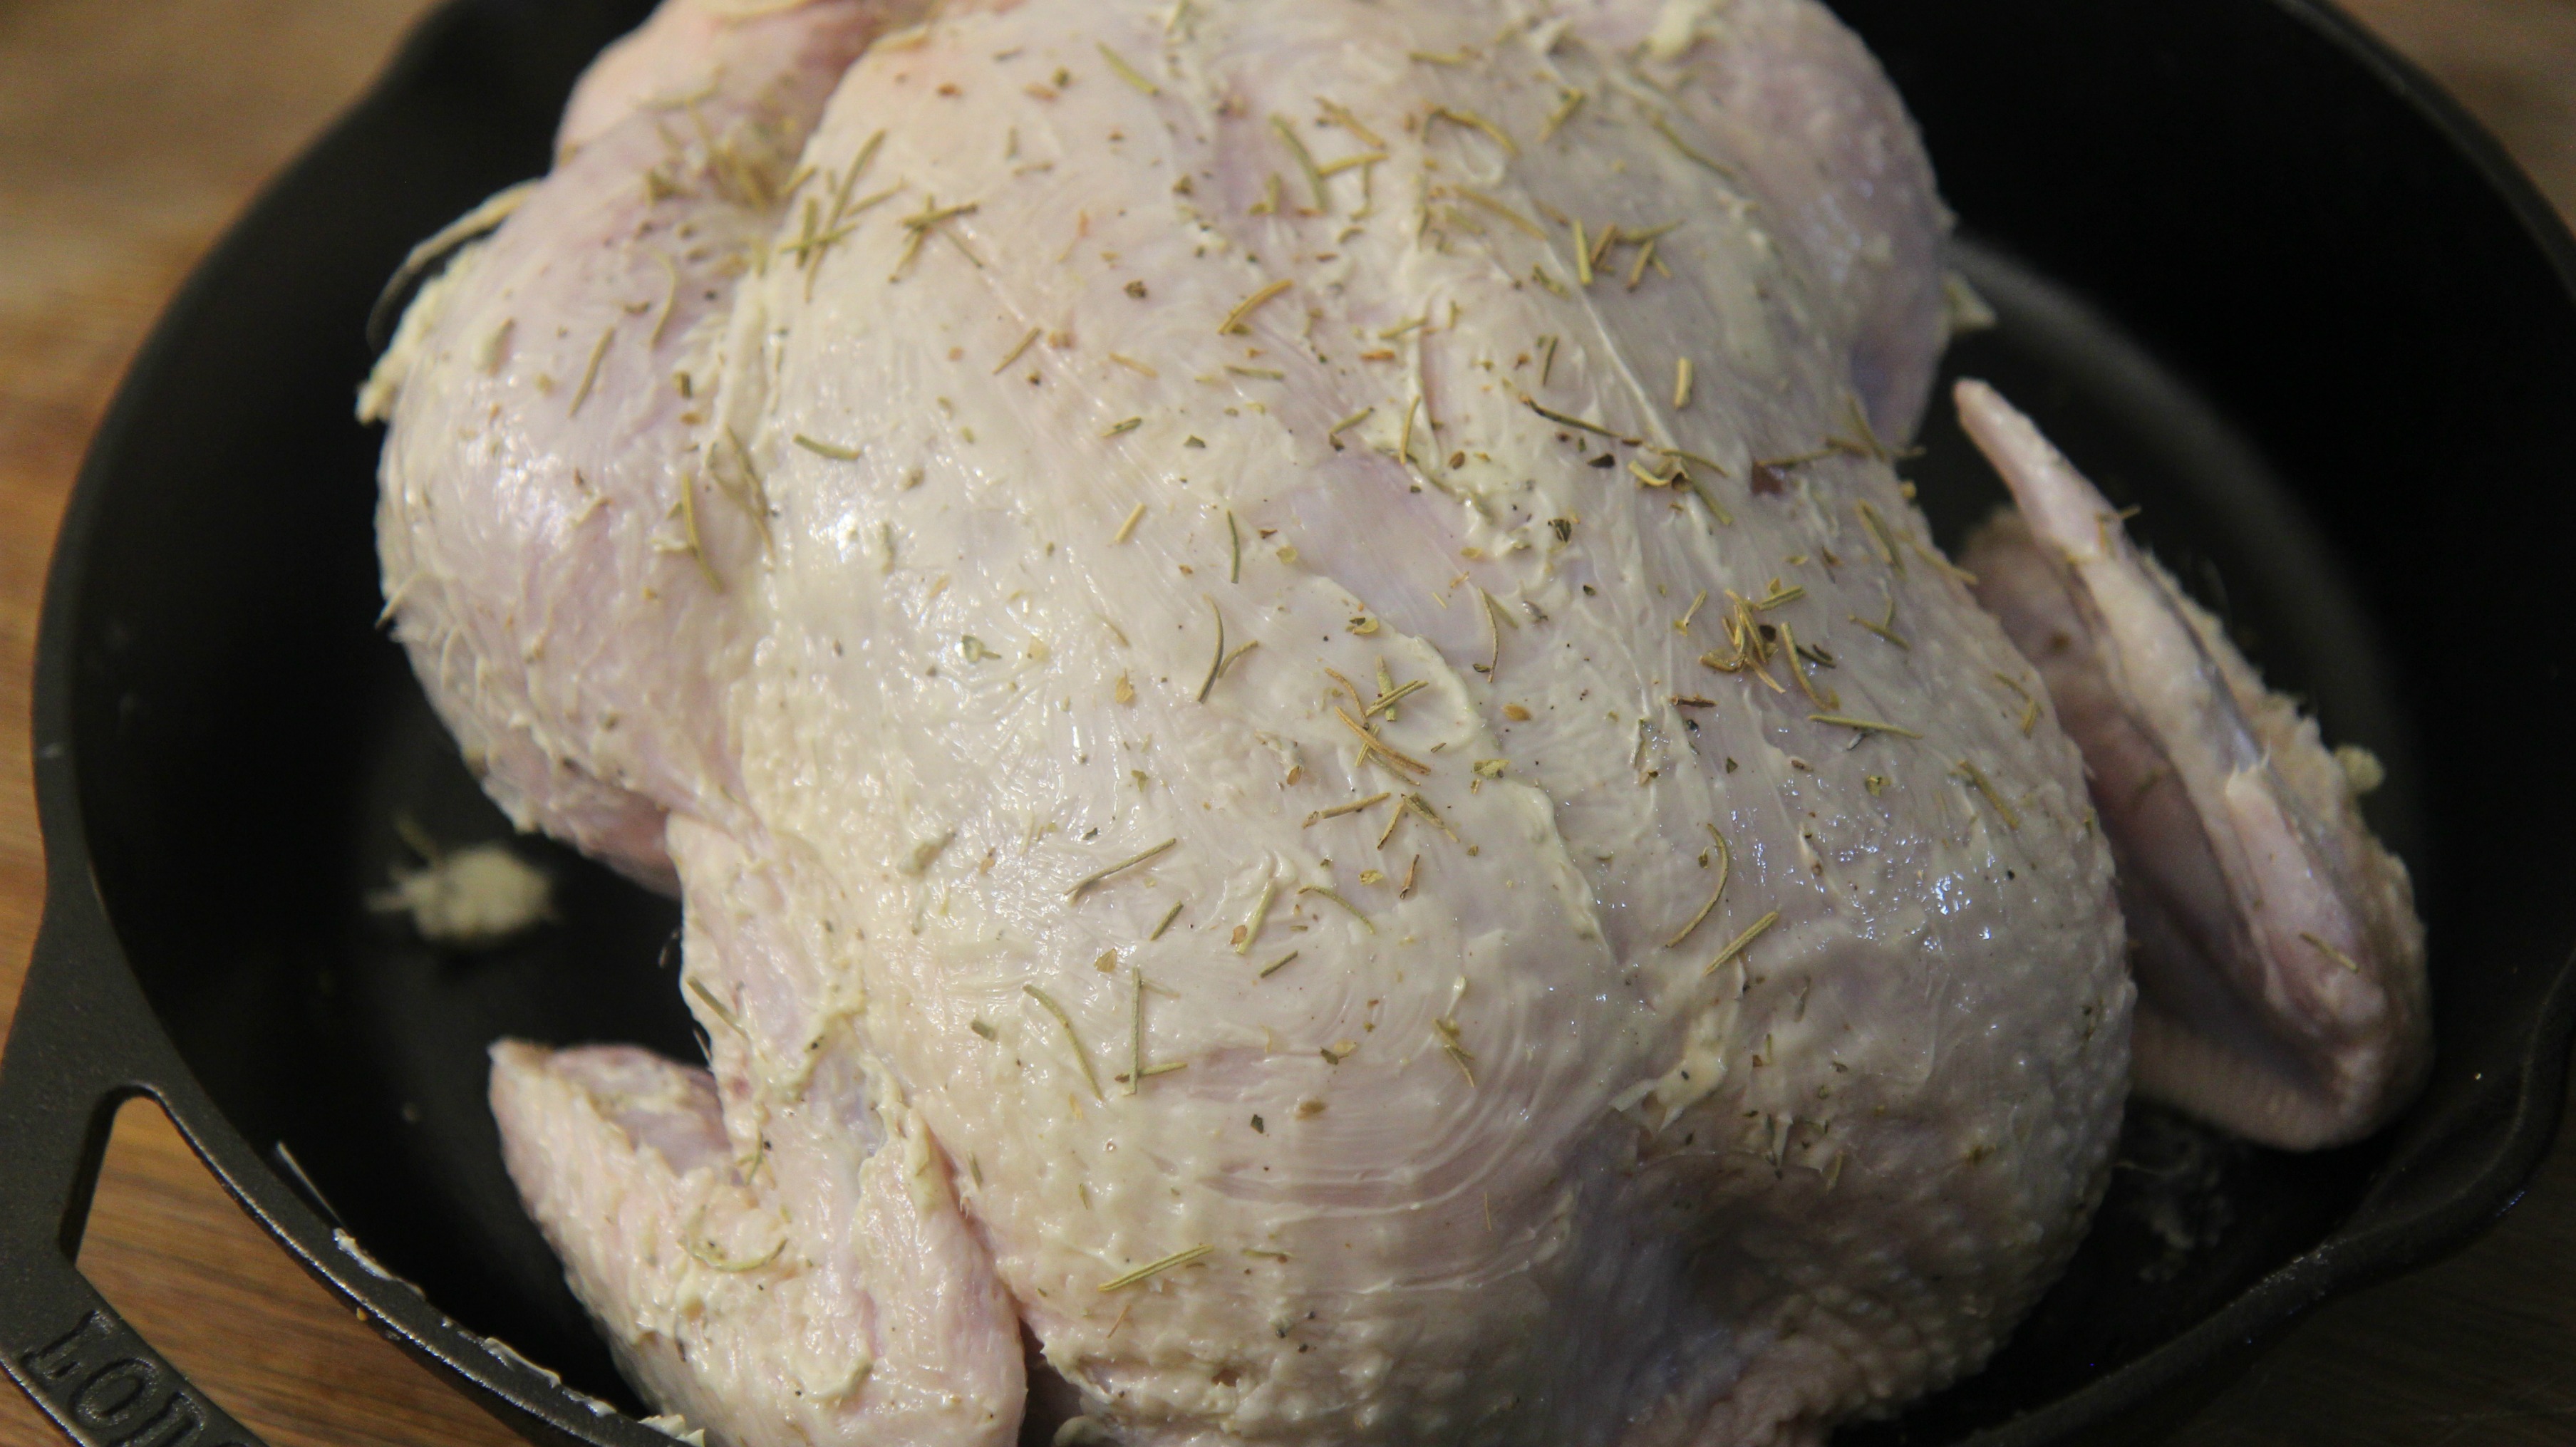 The herb butter rub is the secret to keeping this chicken moist and juicy during the roasting process